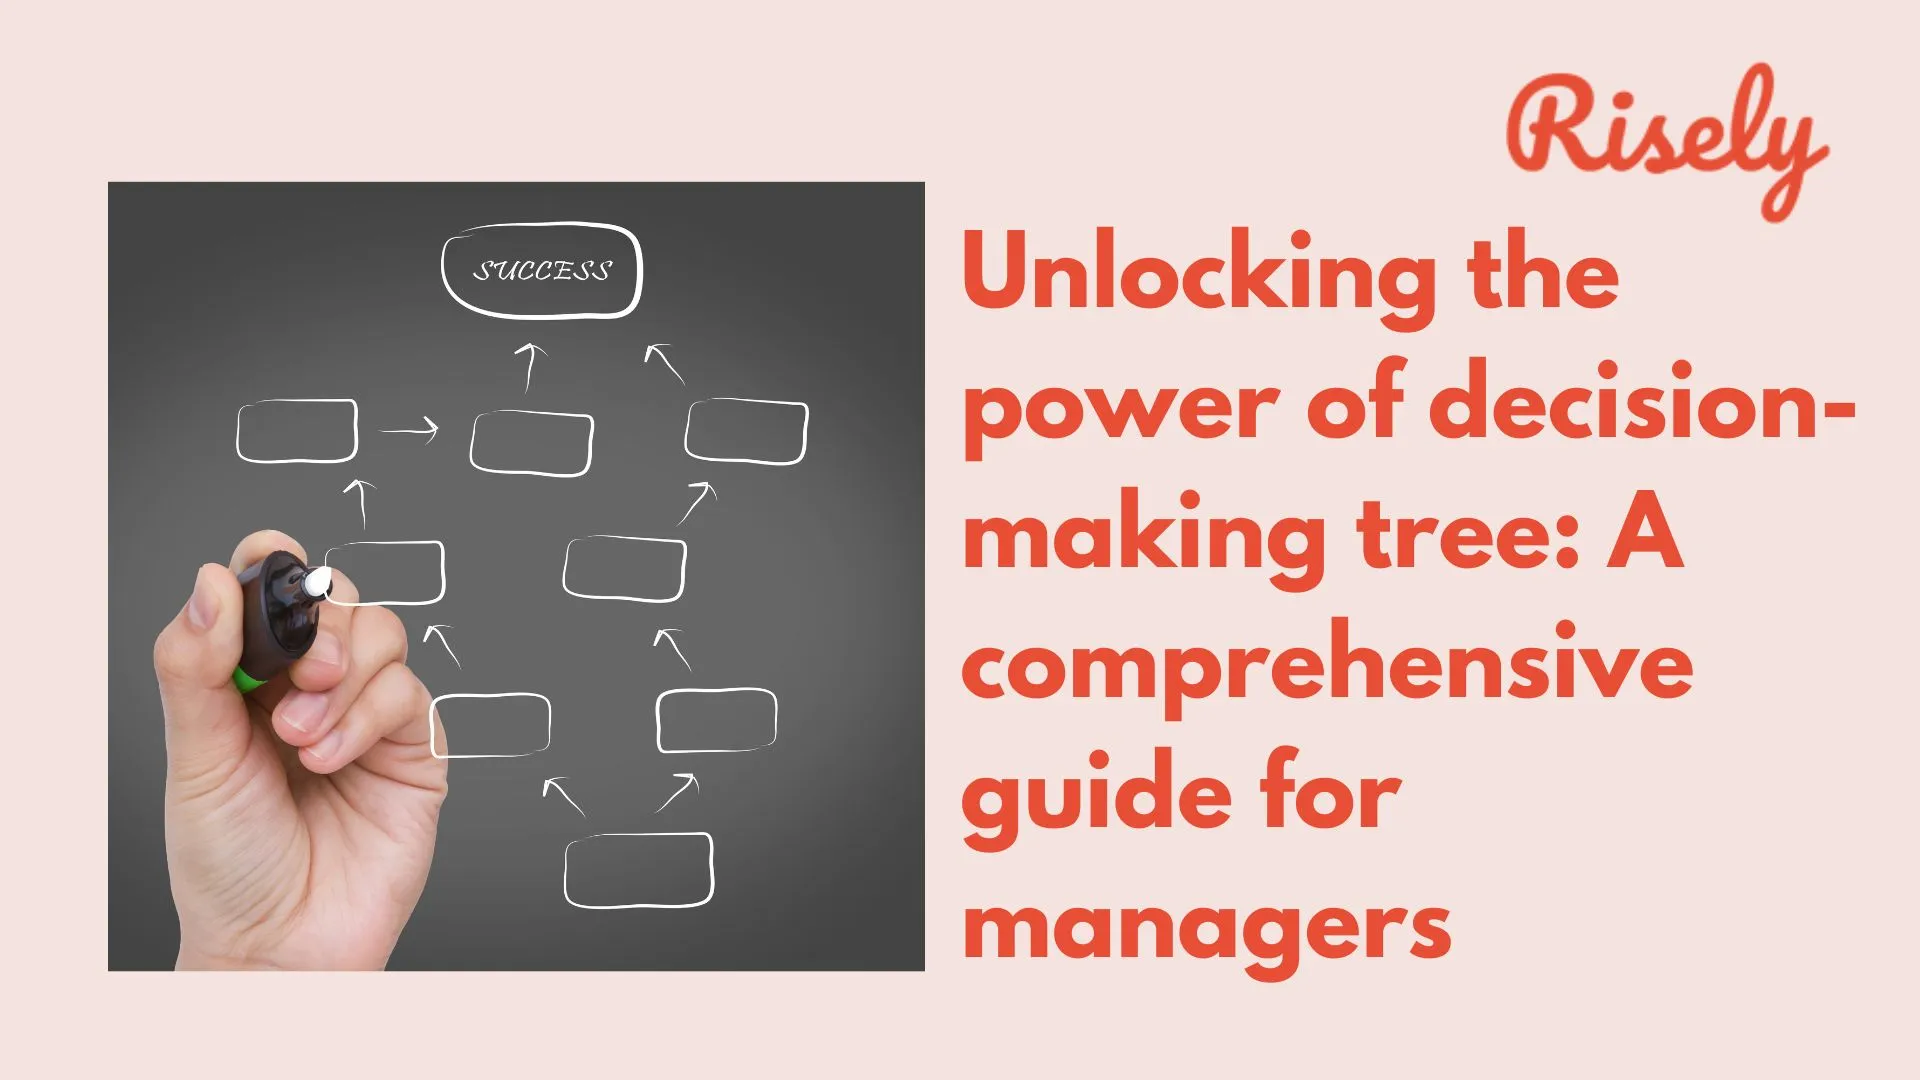 Unlocking the power of decision-making tree: A comprehensive guide for managers